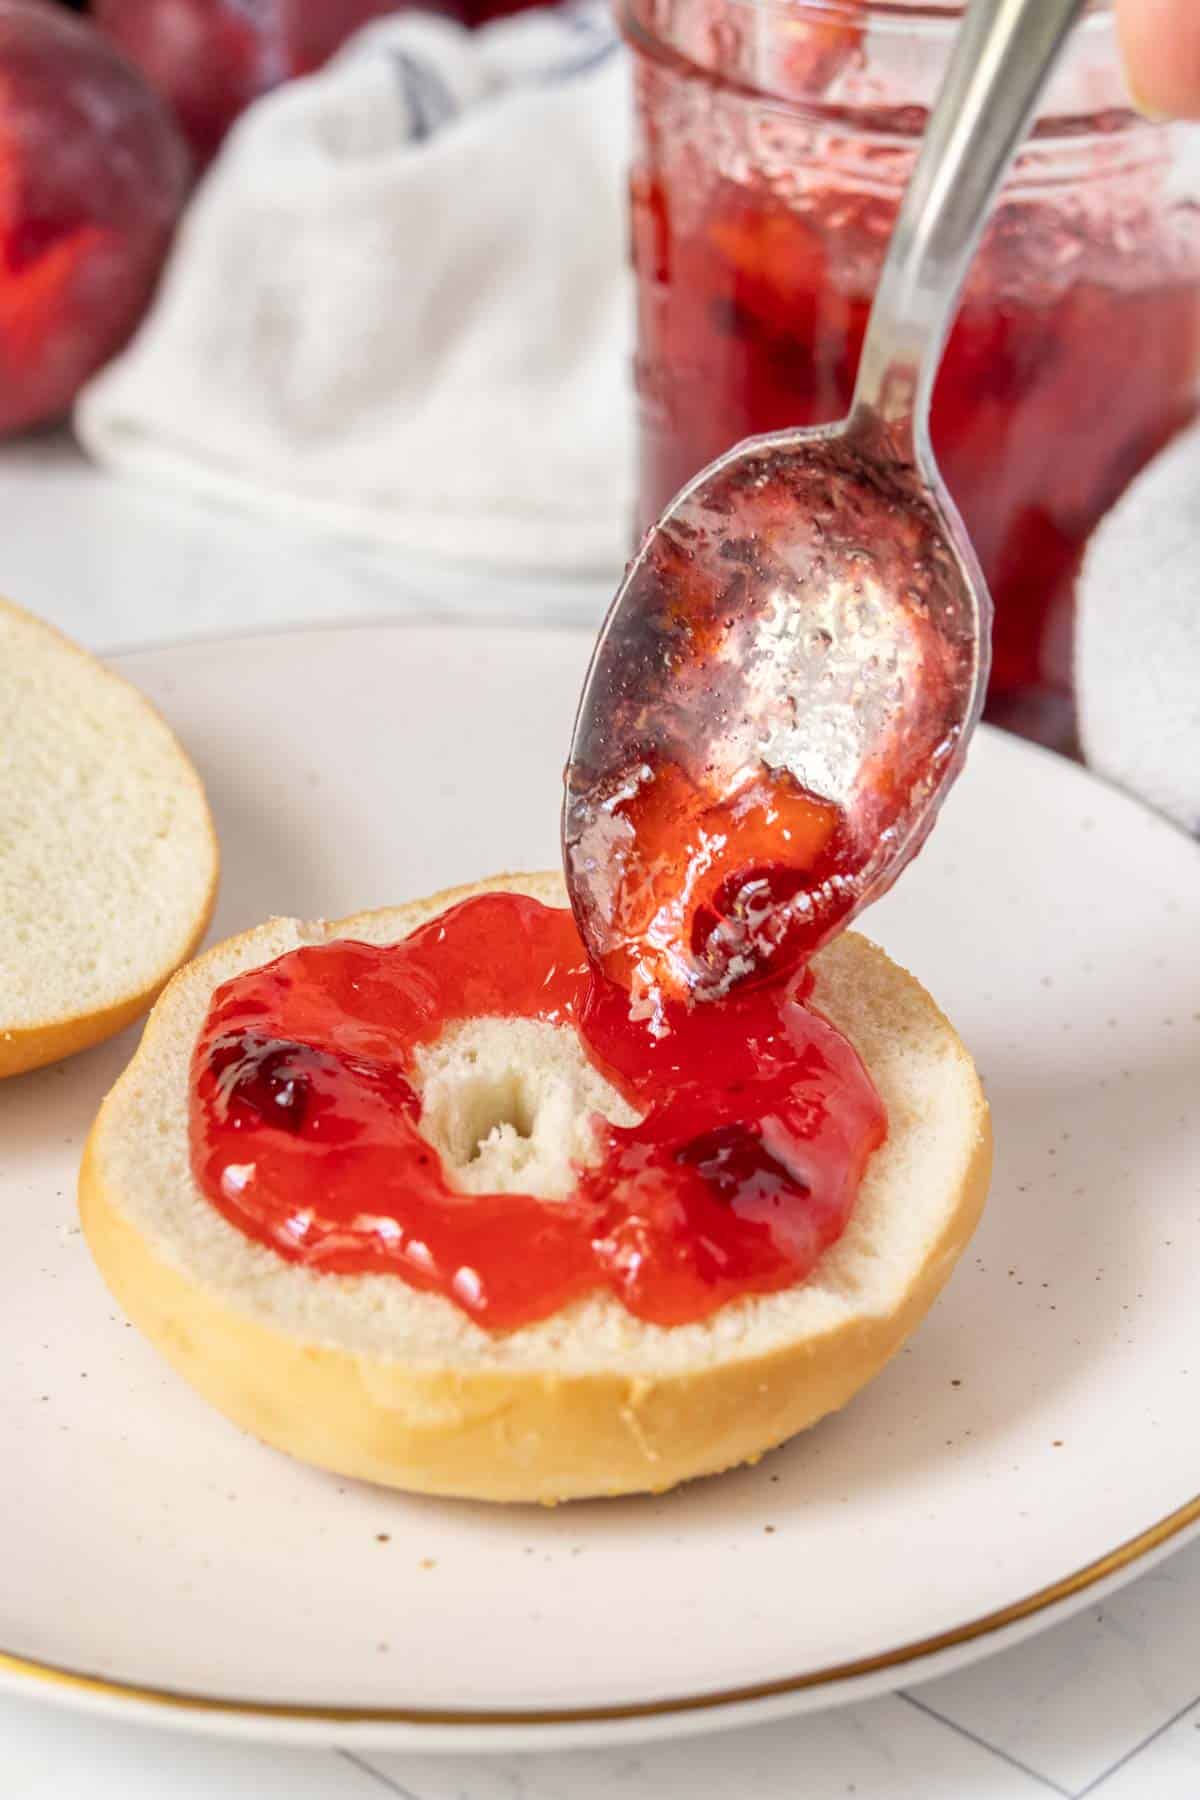 Plum jam on a bagel with a spoon.